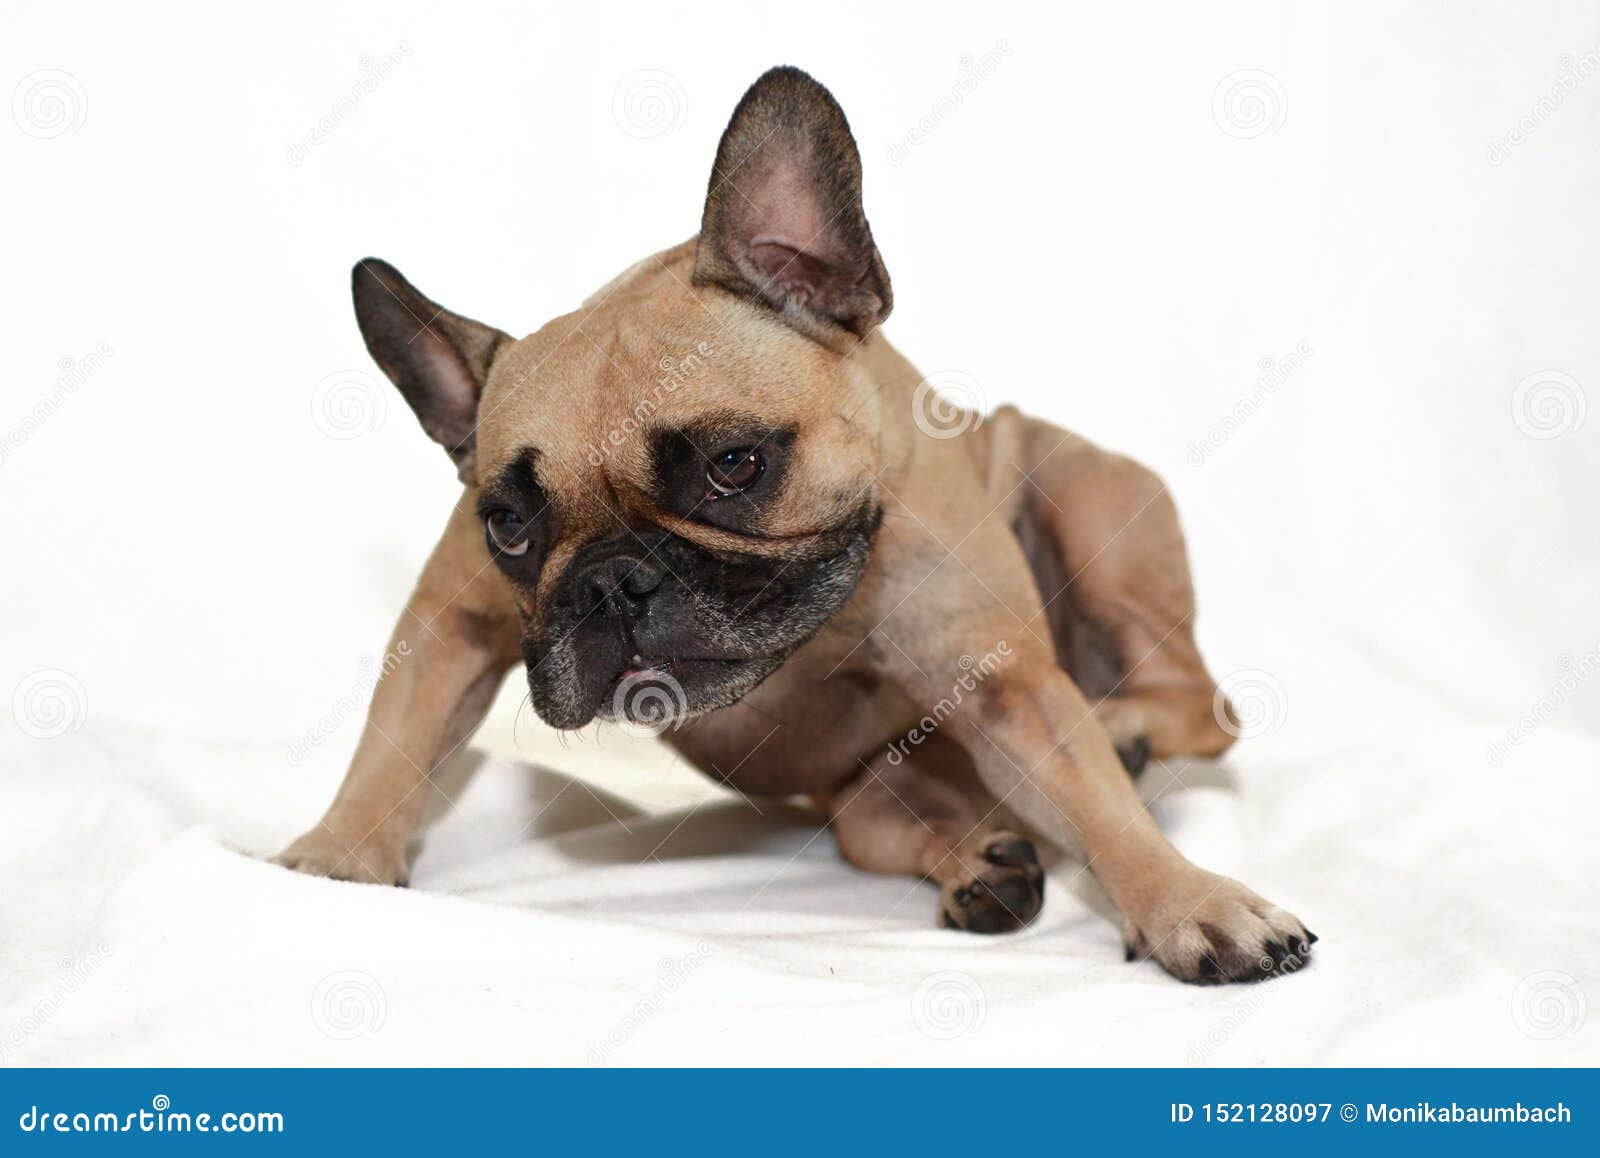 Fawn French Bulldog Dog With Skin Allergies Scratching In